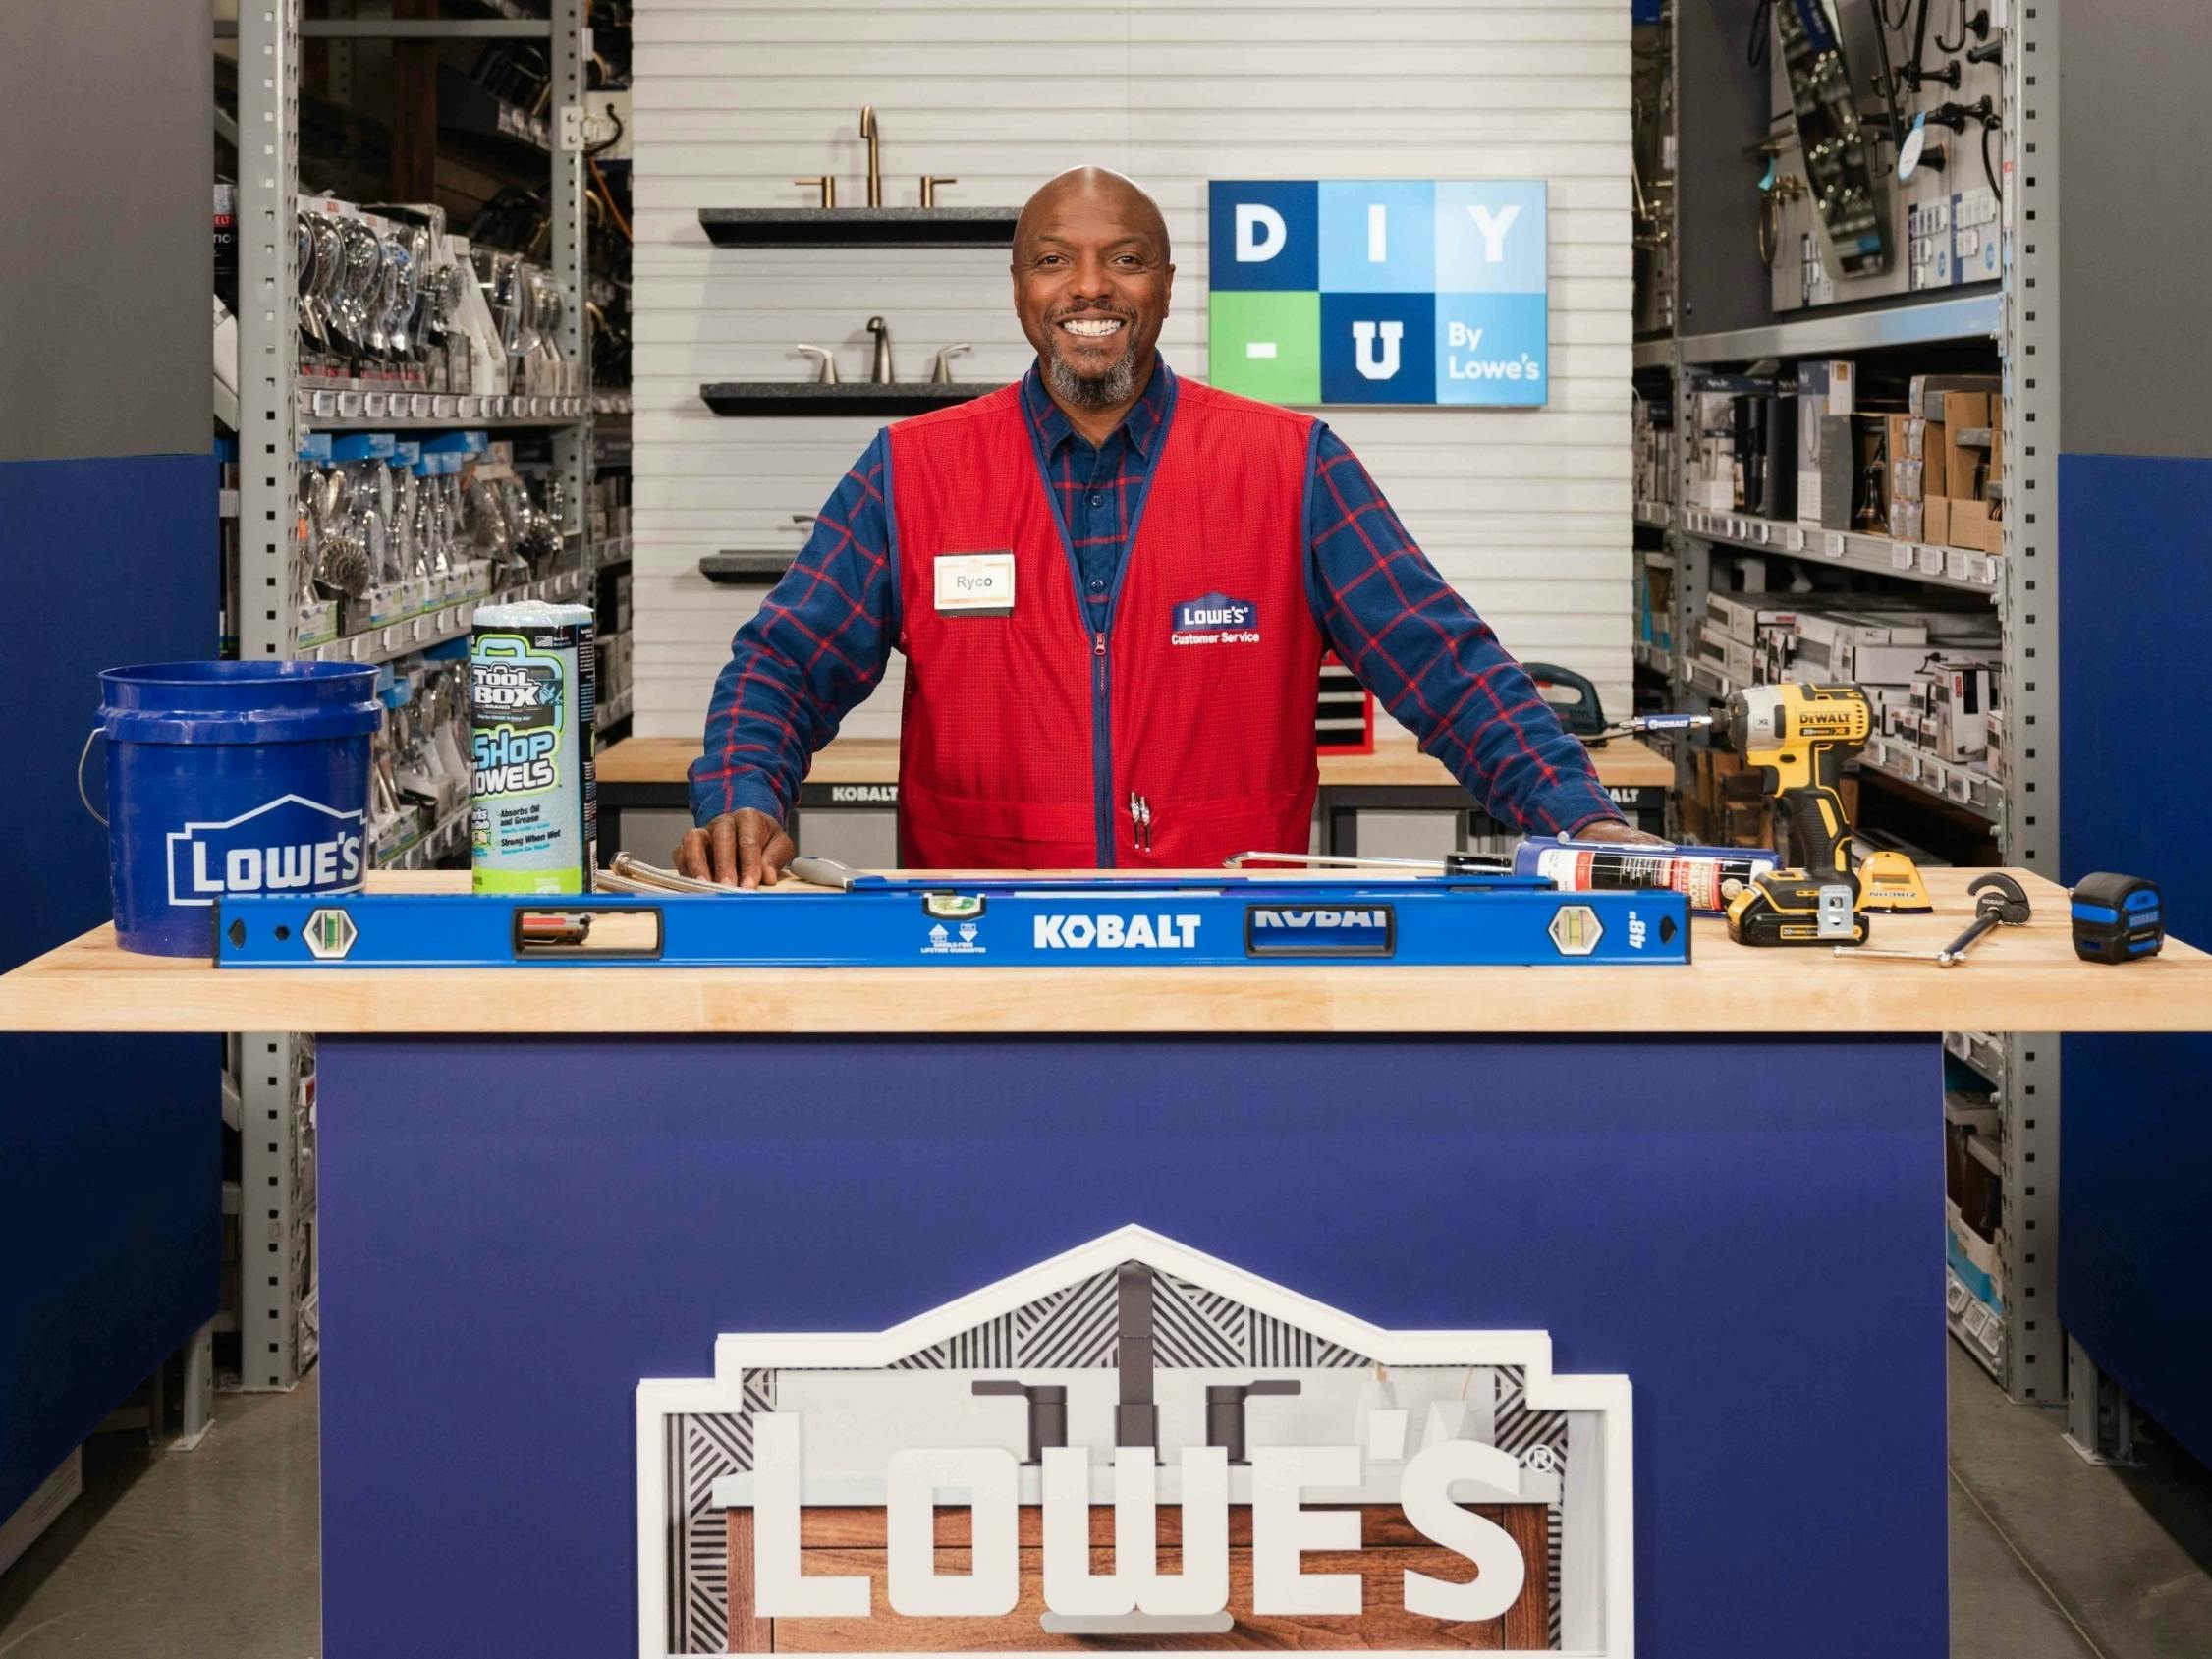 A Lowe's DIY-U instructor standing at a workbench with a DIY-U sign behind him